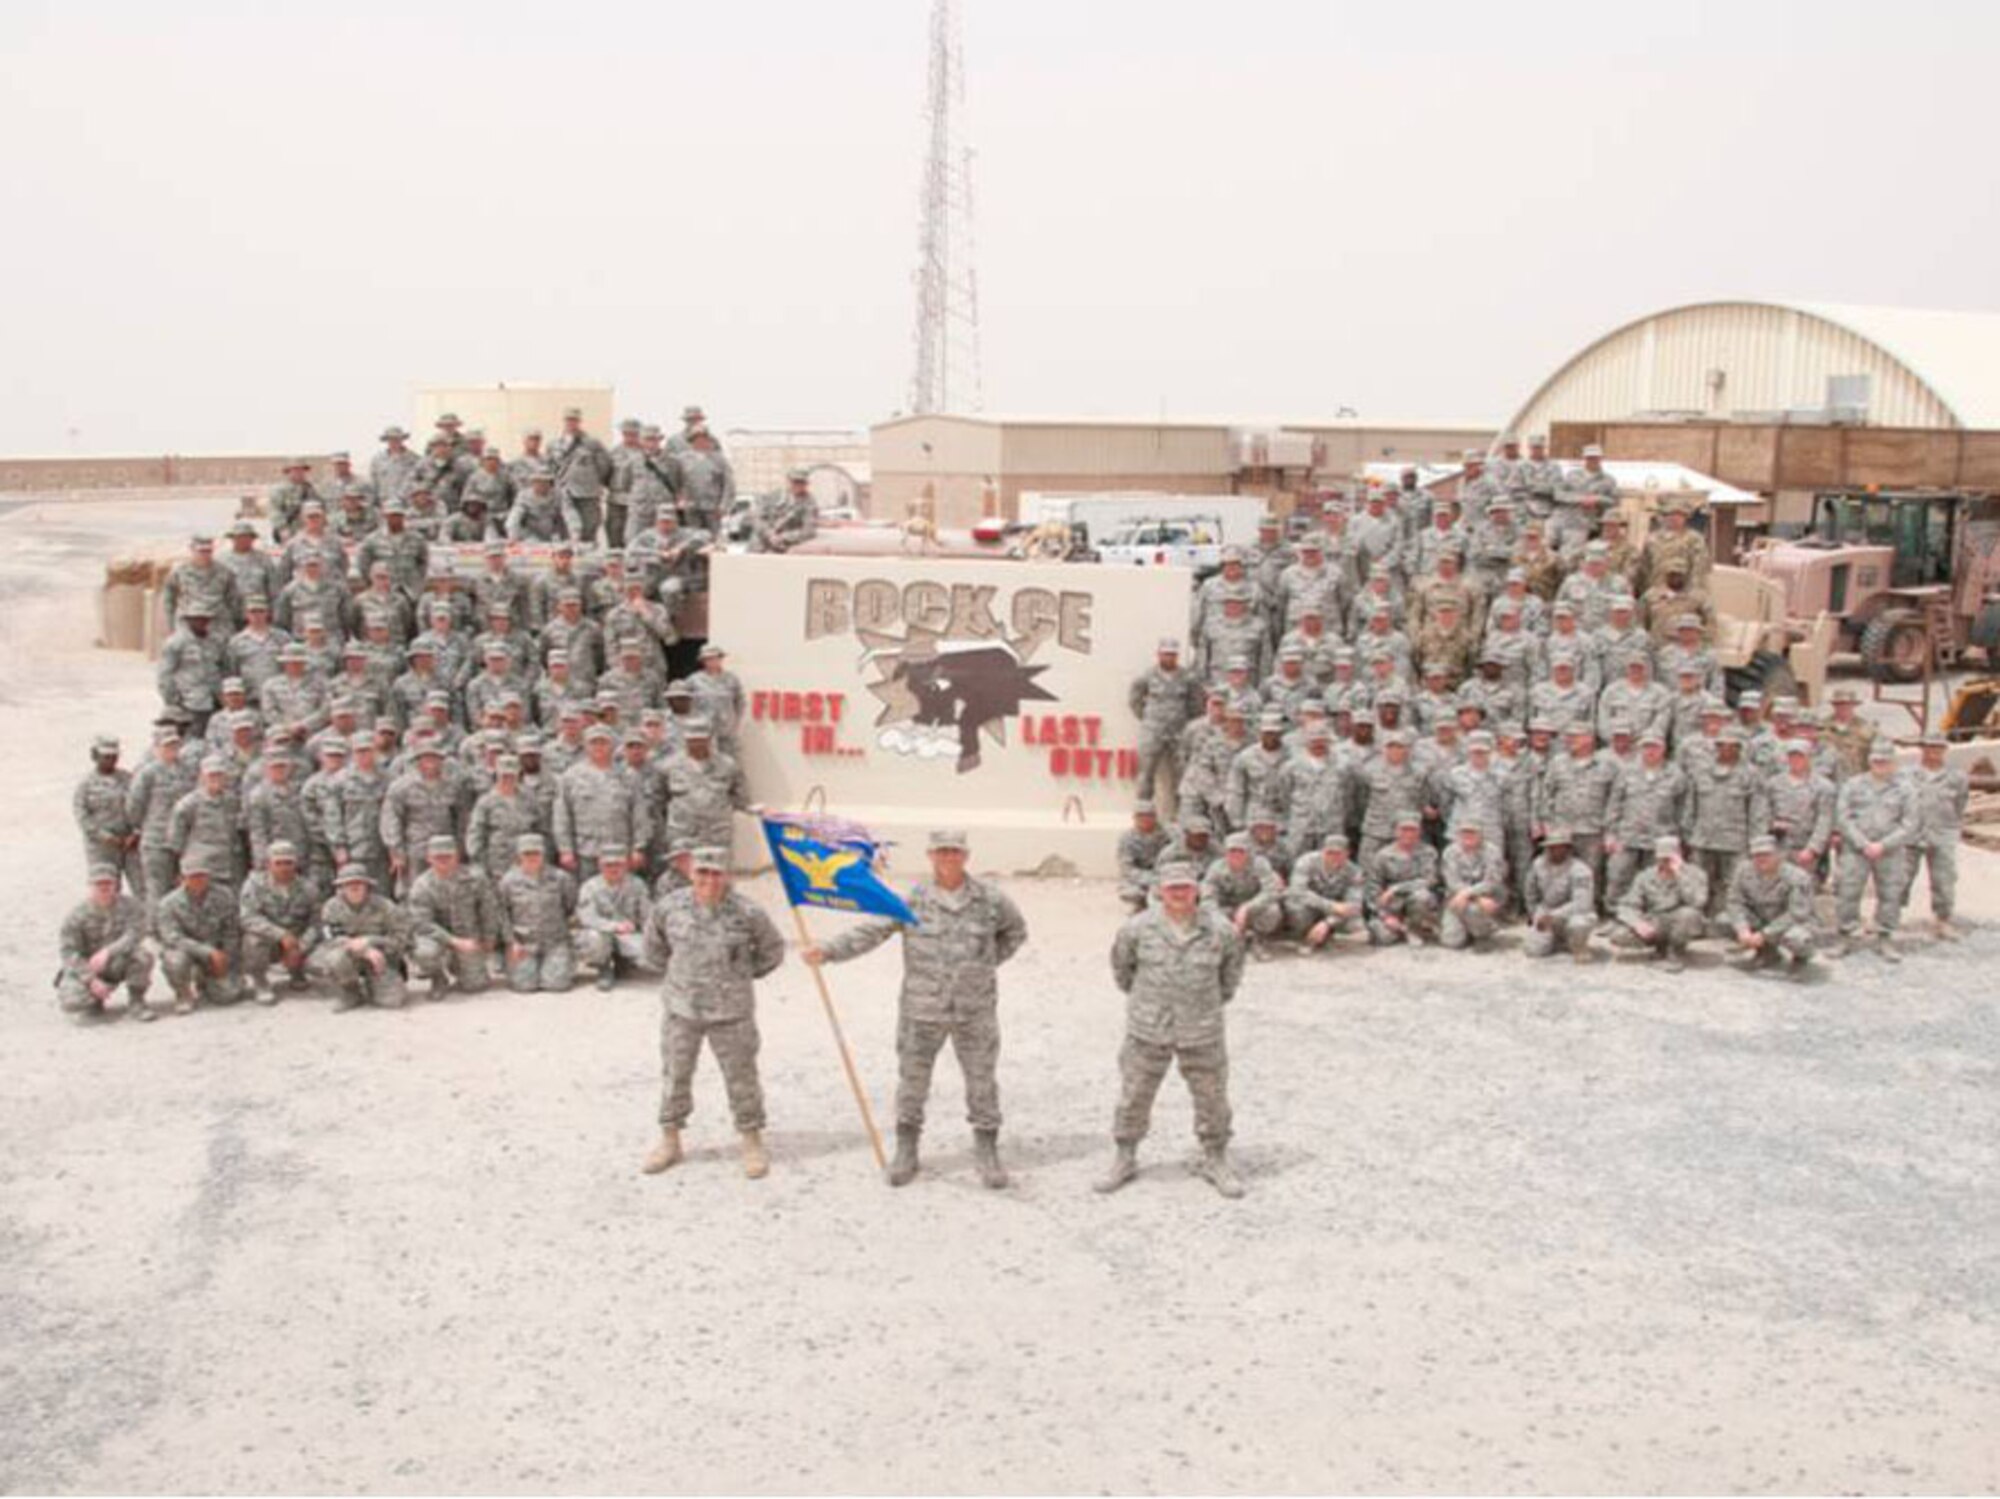 SOUTHWEST ASIA -- Air guardsmen from the 176 Civil Engineer Squadron stand along side the other members of the 386 Air Expeditionaly Wing in formation here May 5. The air guardsmen were assigned to the 386 Expeditionary Civil Engineer Squadron for a six-month tour.